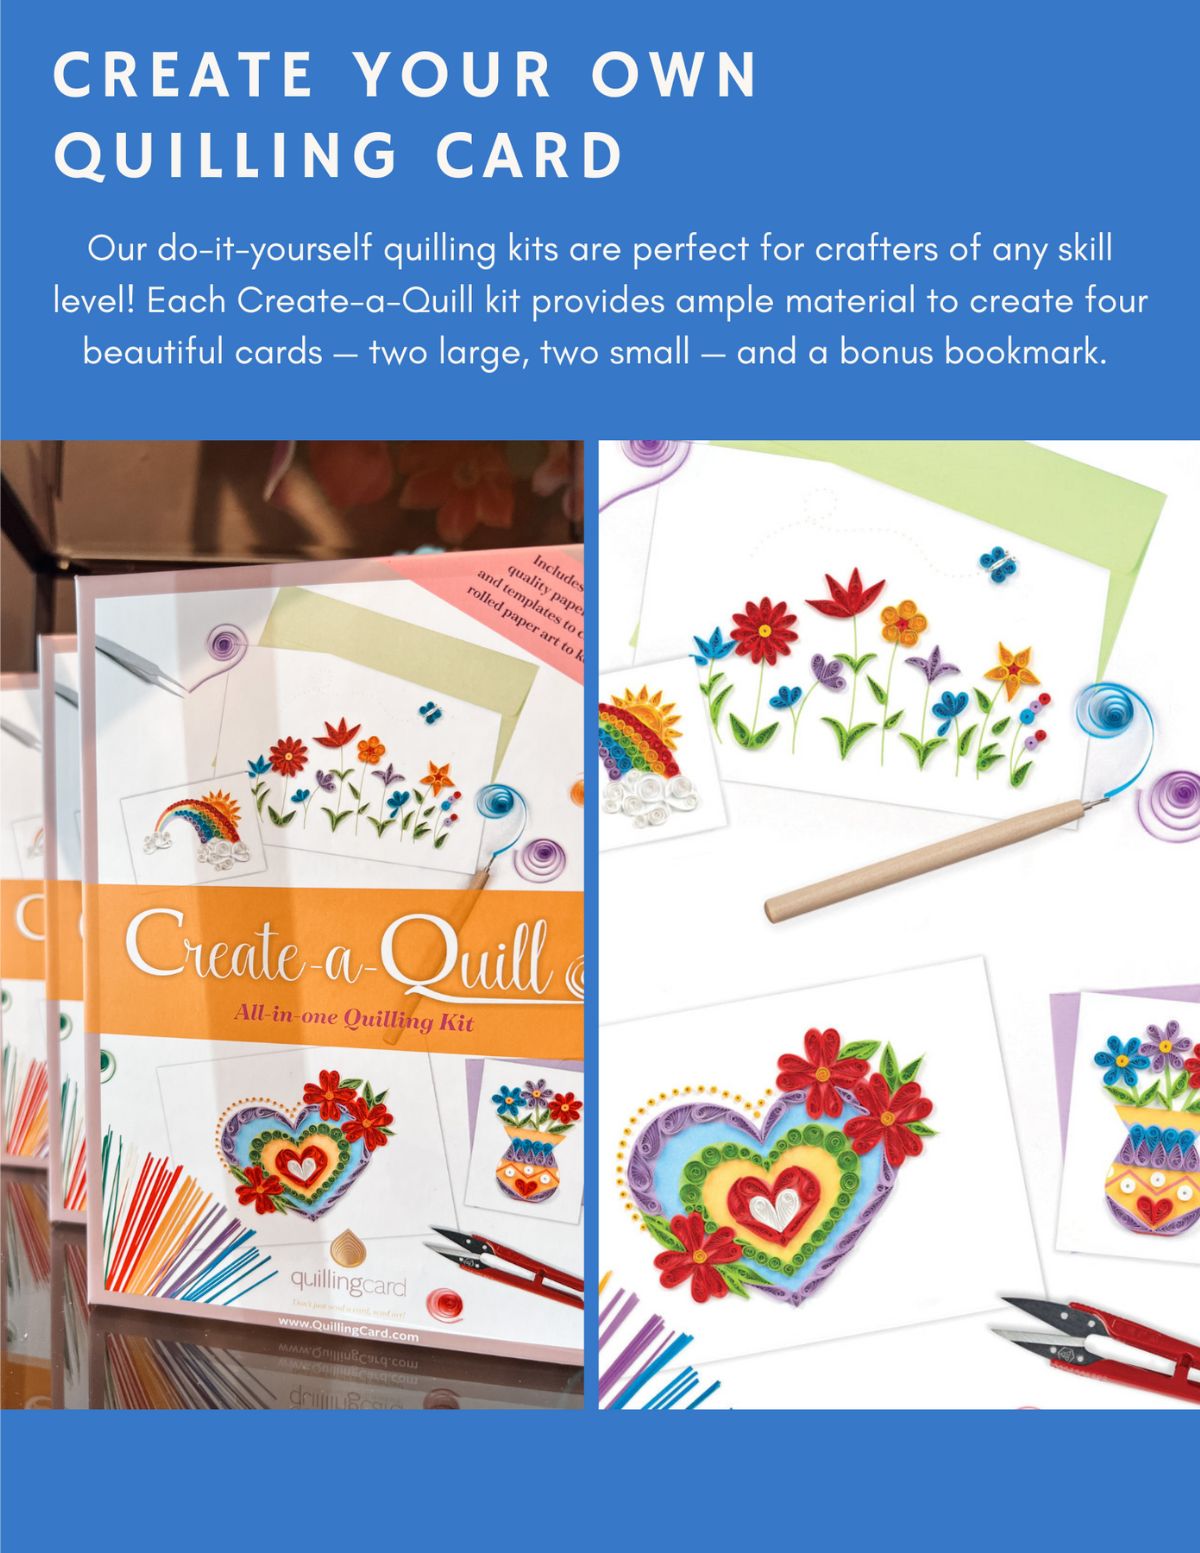 Create your own Quilling Cards